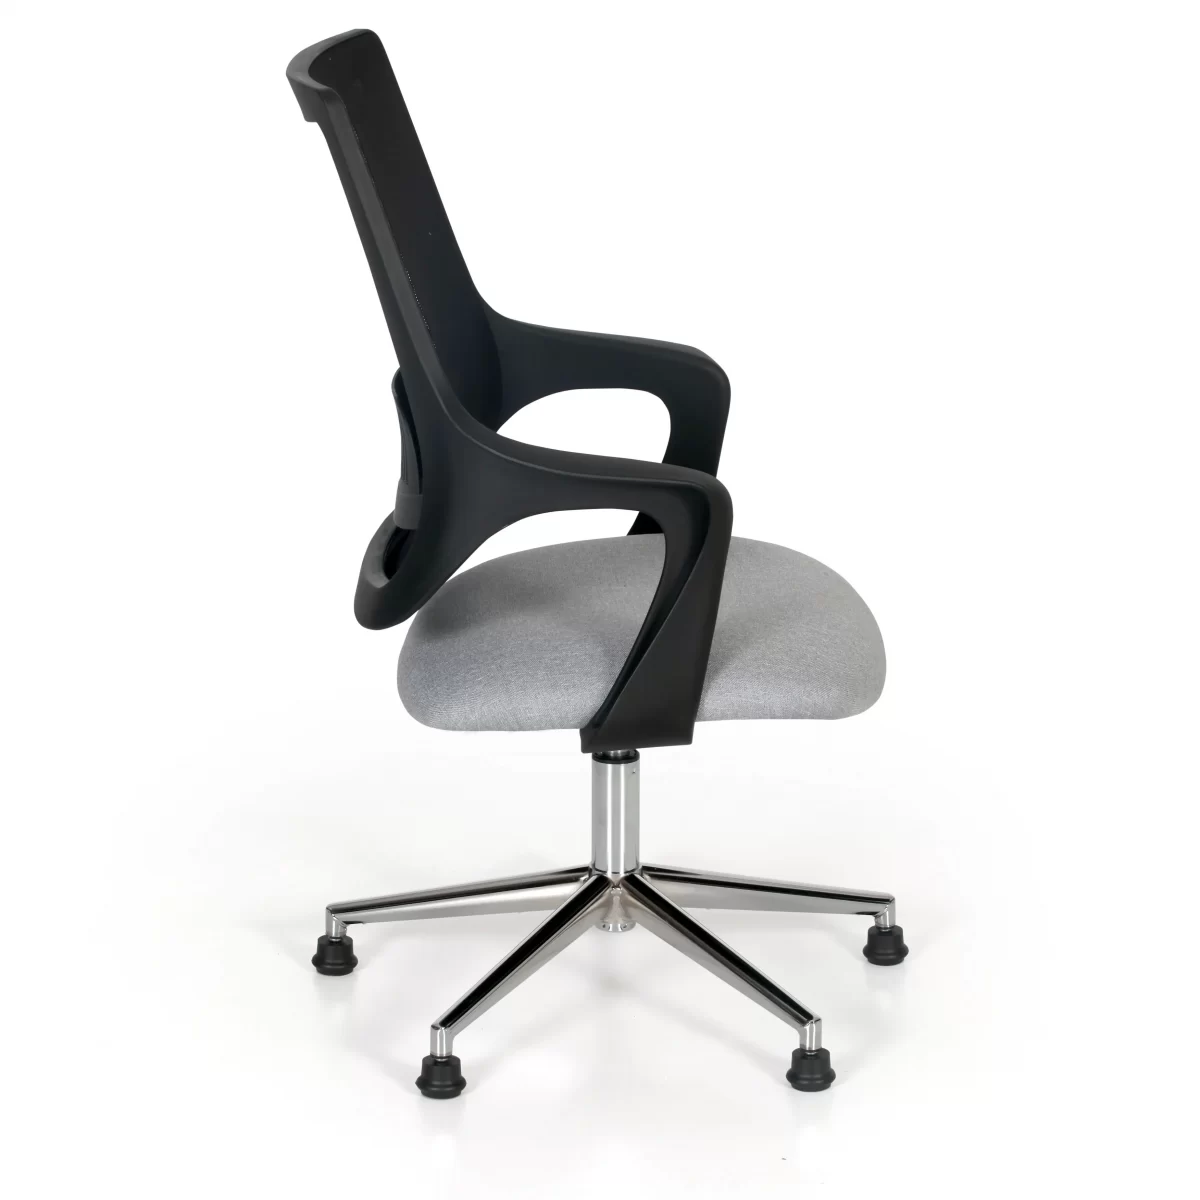 Thomas Ch Office Guest Chair Chrome Legs 2 scaled